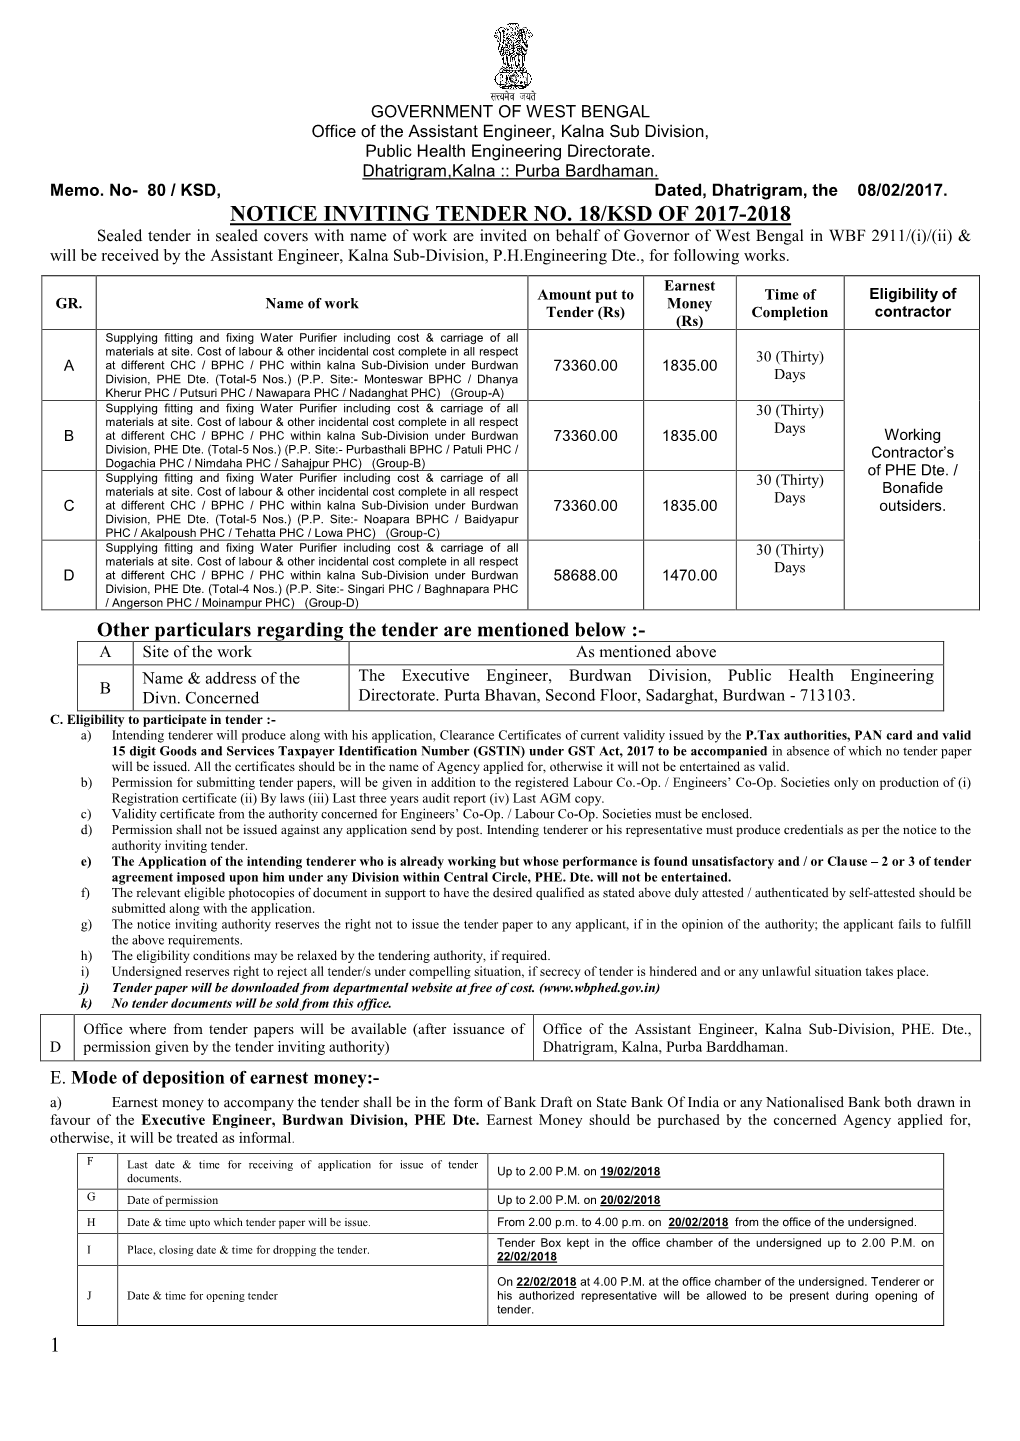 GOVERNMENT of WEST BENGAL Office of the Assistant Engineer, Kalna Sub Division, Public Health Engineering Directorate